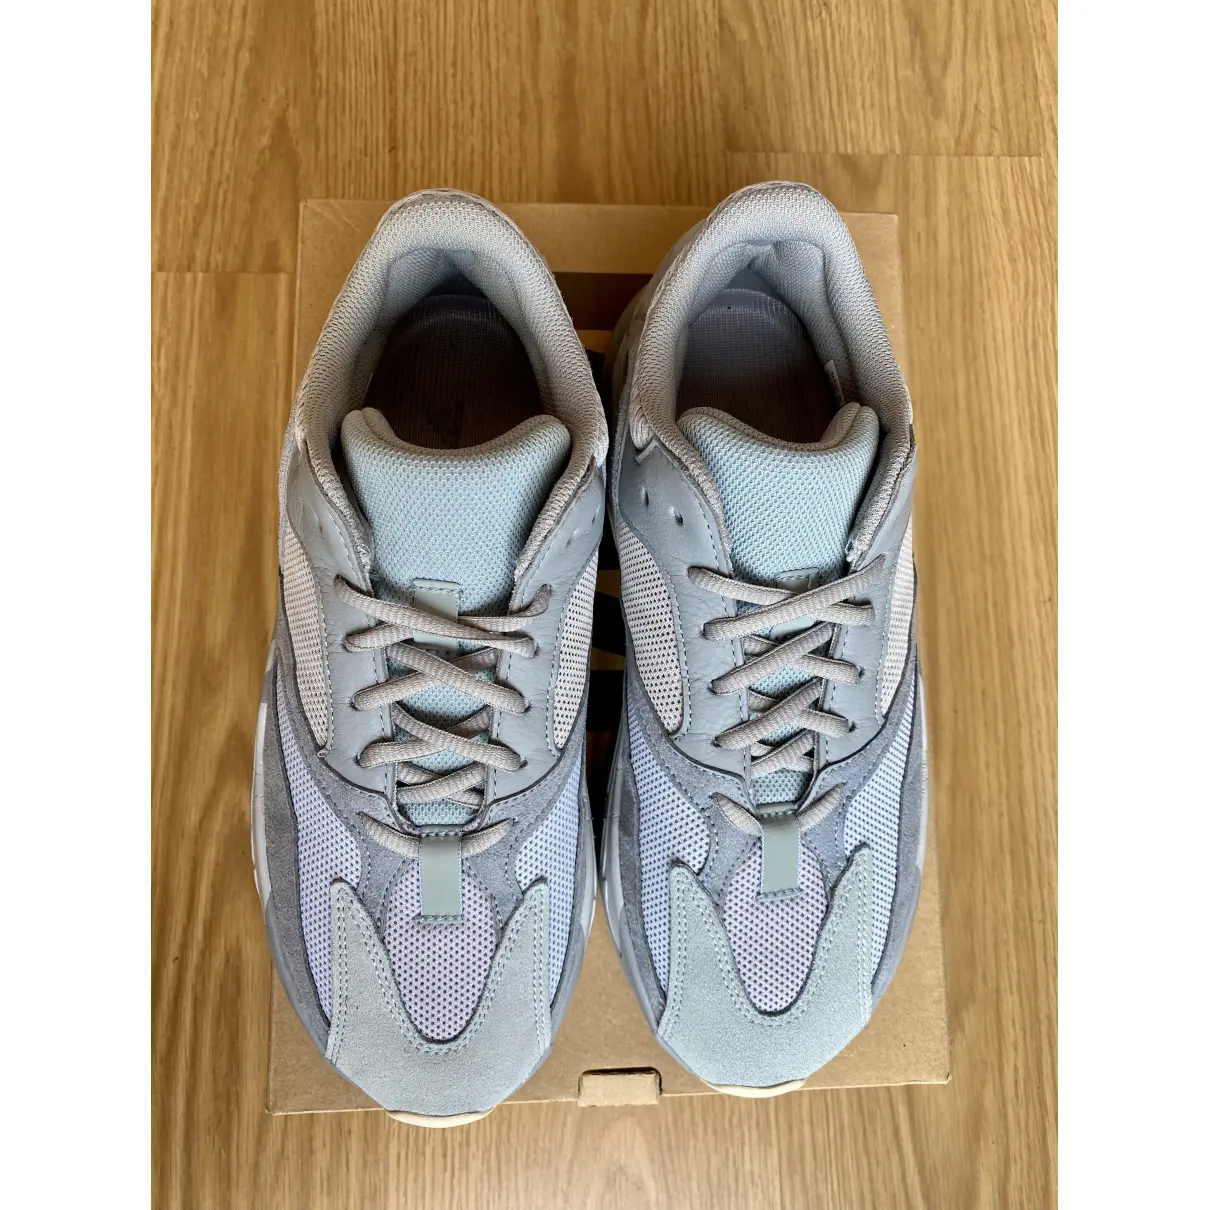 Buy Yeezy x Adidas Boost 700 V2 high trainers online